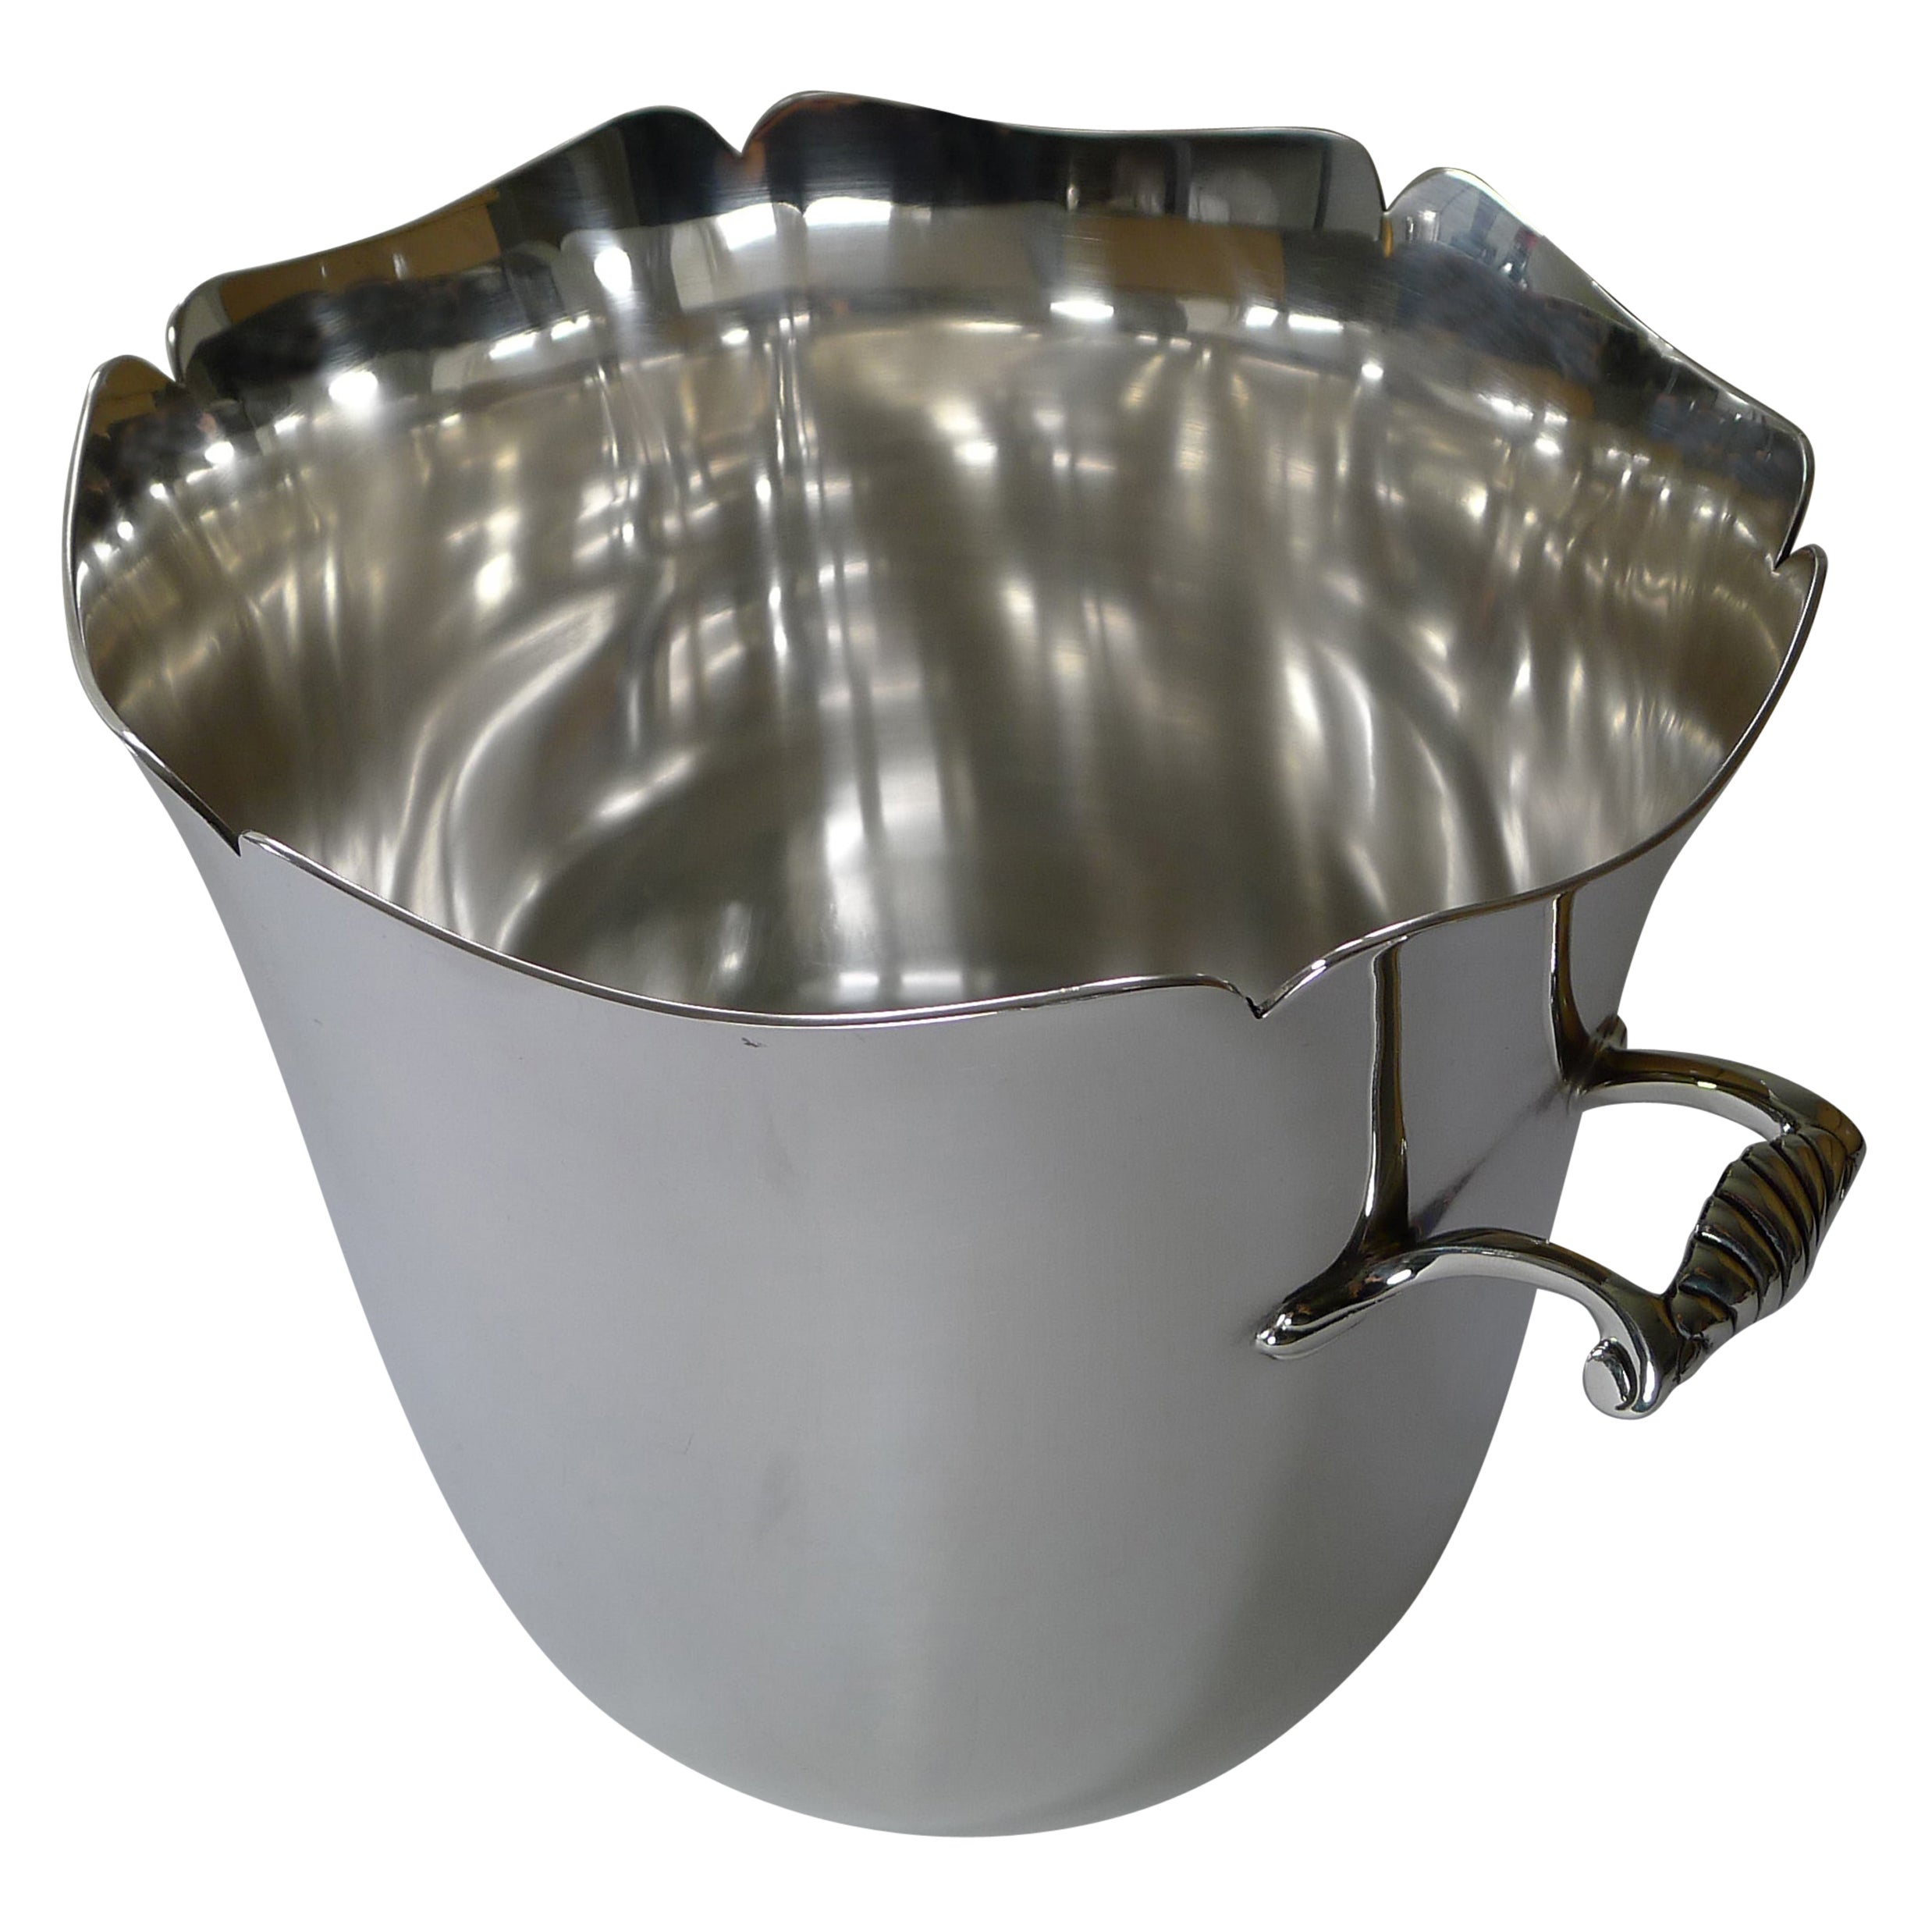 French Silver Plated Champagne Bucket / Wine Cooler by Ercuis, Paris